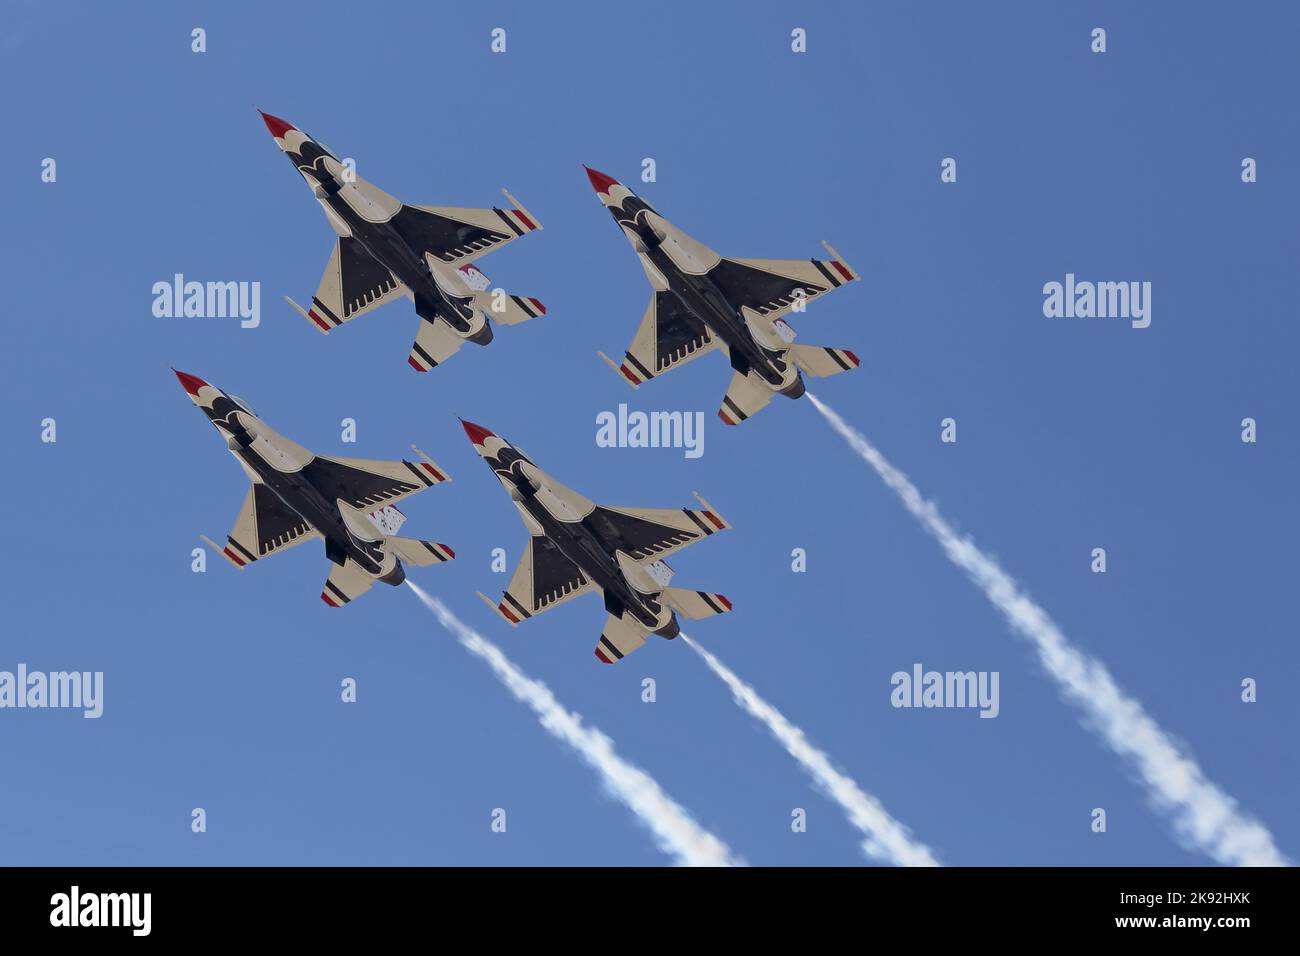 Edwards Air Force Base, California / USA - Oct. 15, 2022: The United States Air Force (USAF) Thunderbirds air demonstration squadron in formation. Stock Photo